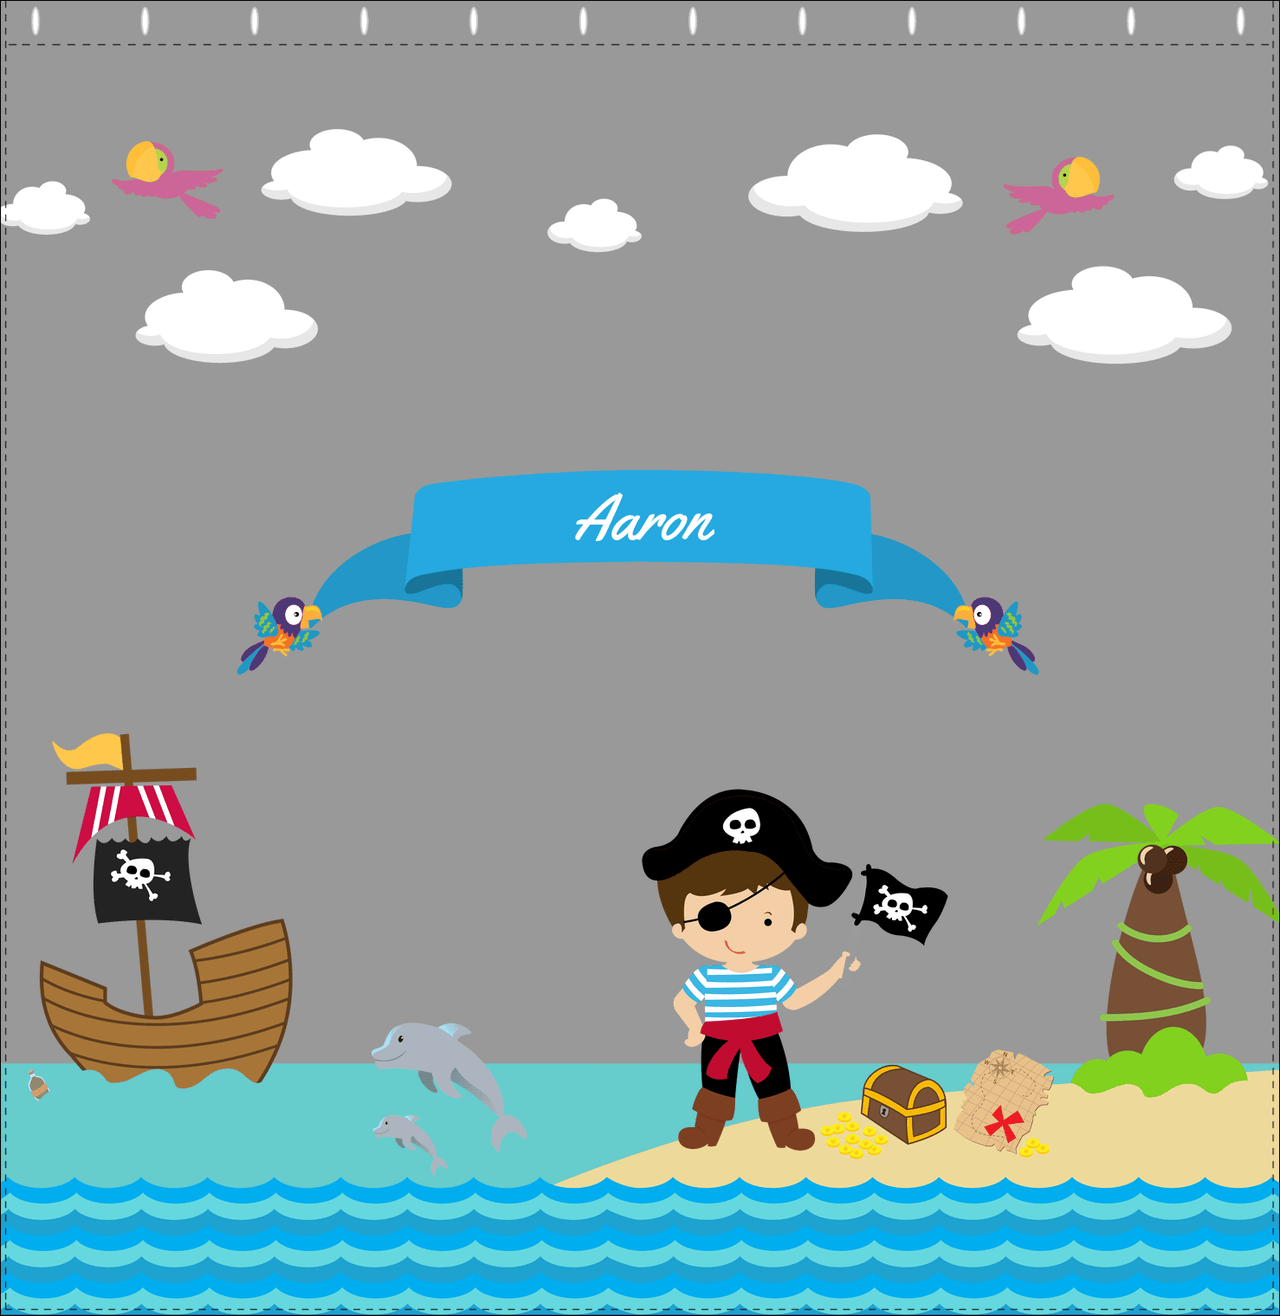 Personalized Pirate Shower Curtain III - Grey Background - Brown Hair Boy with Flag - Decorate View